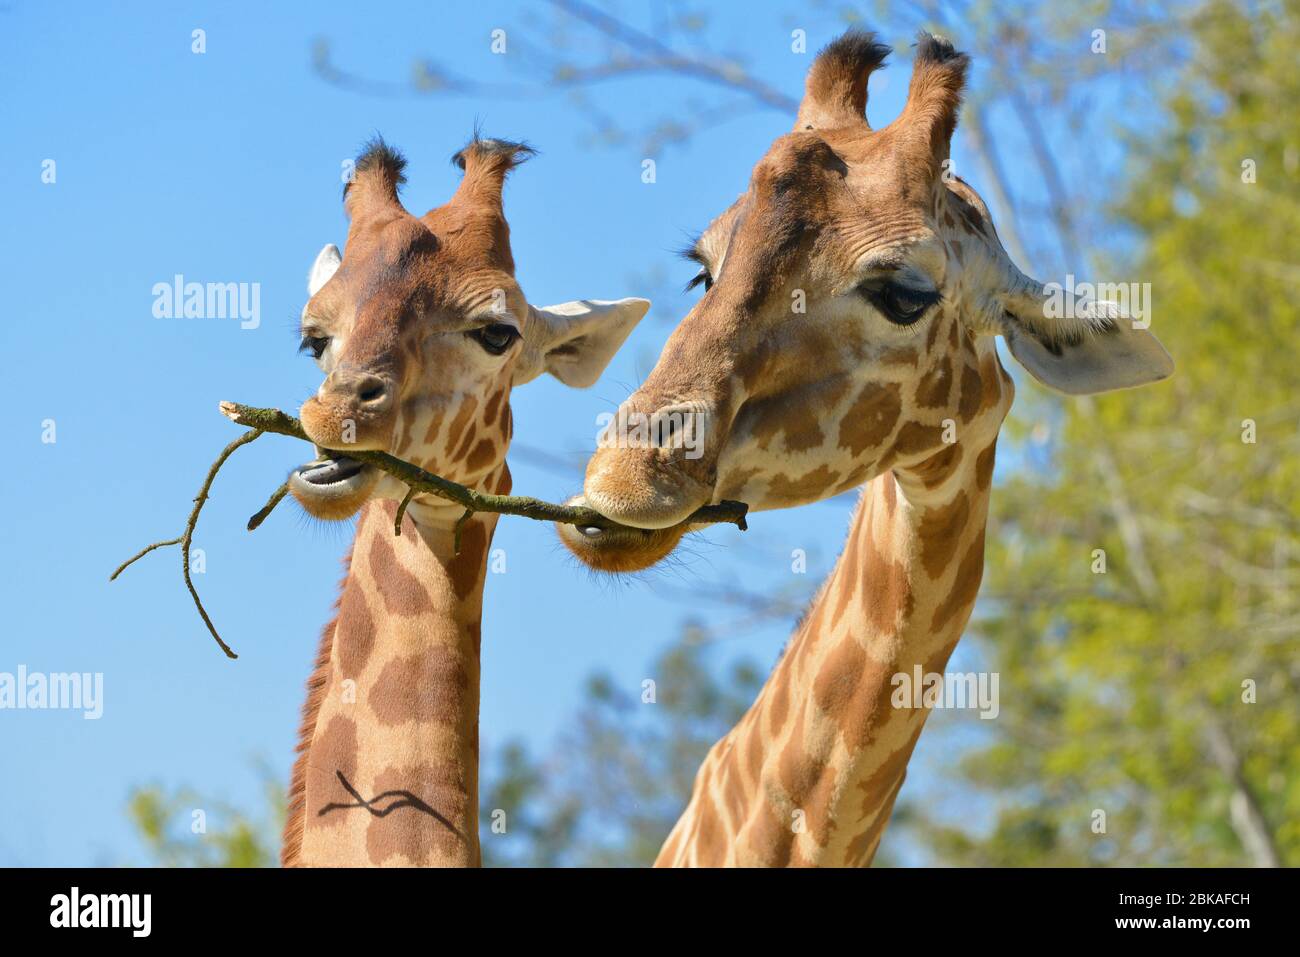 Closeup of two giraffes (Giraffa camelopardalis) eating a twig on blue sky and trees background Stock Photo